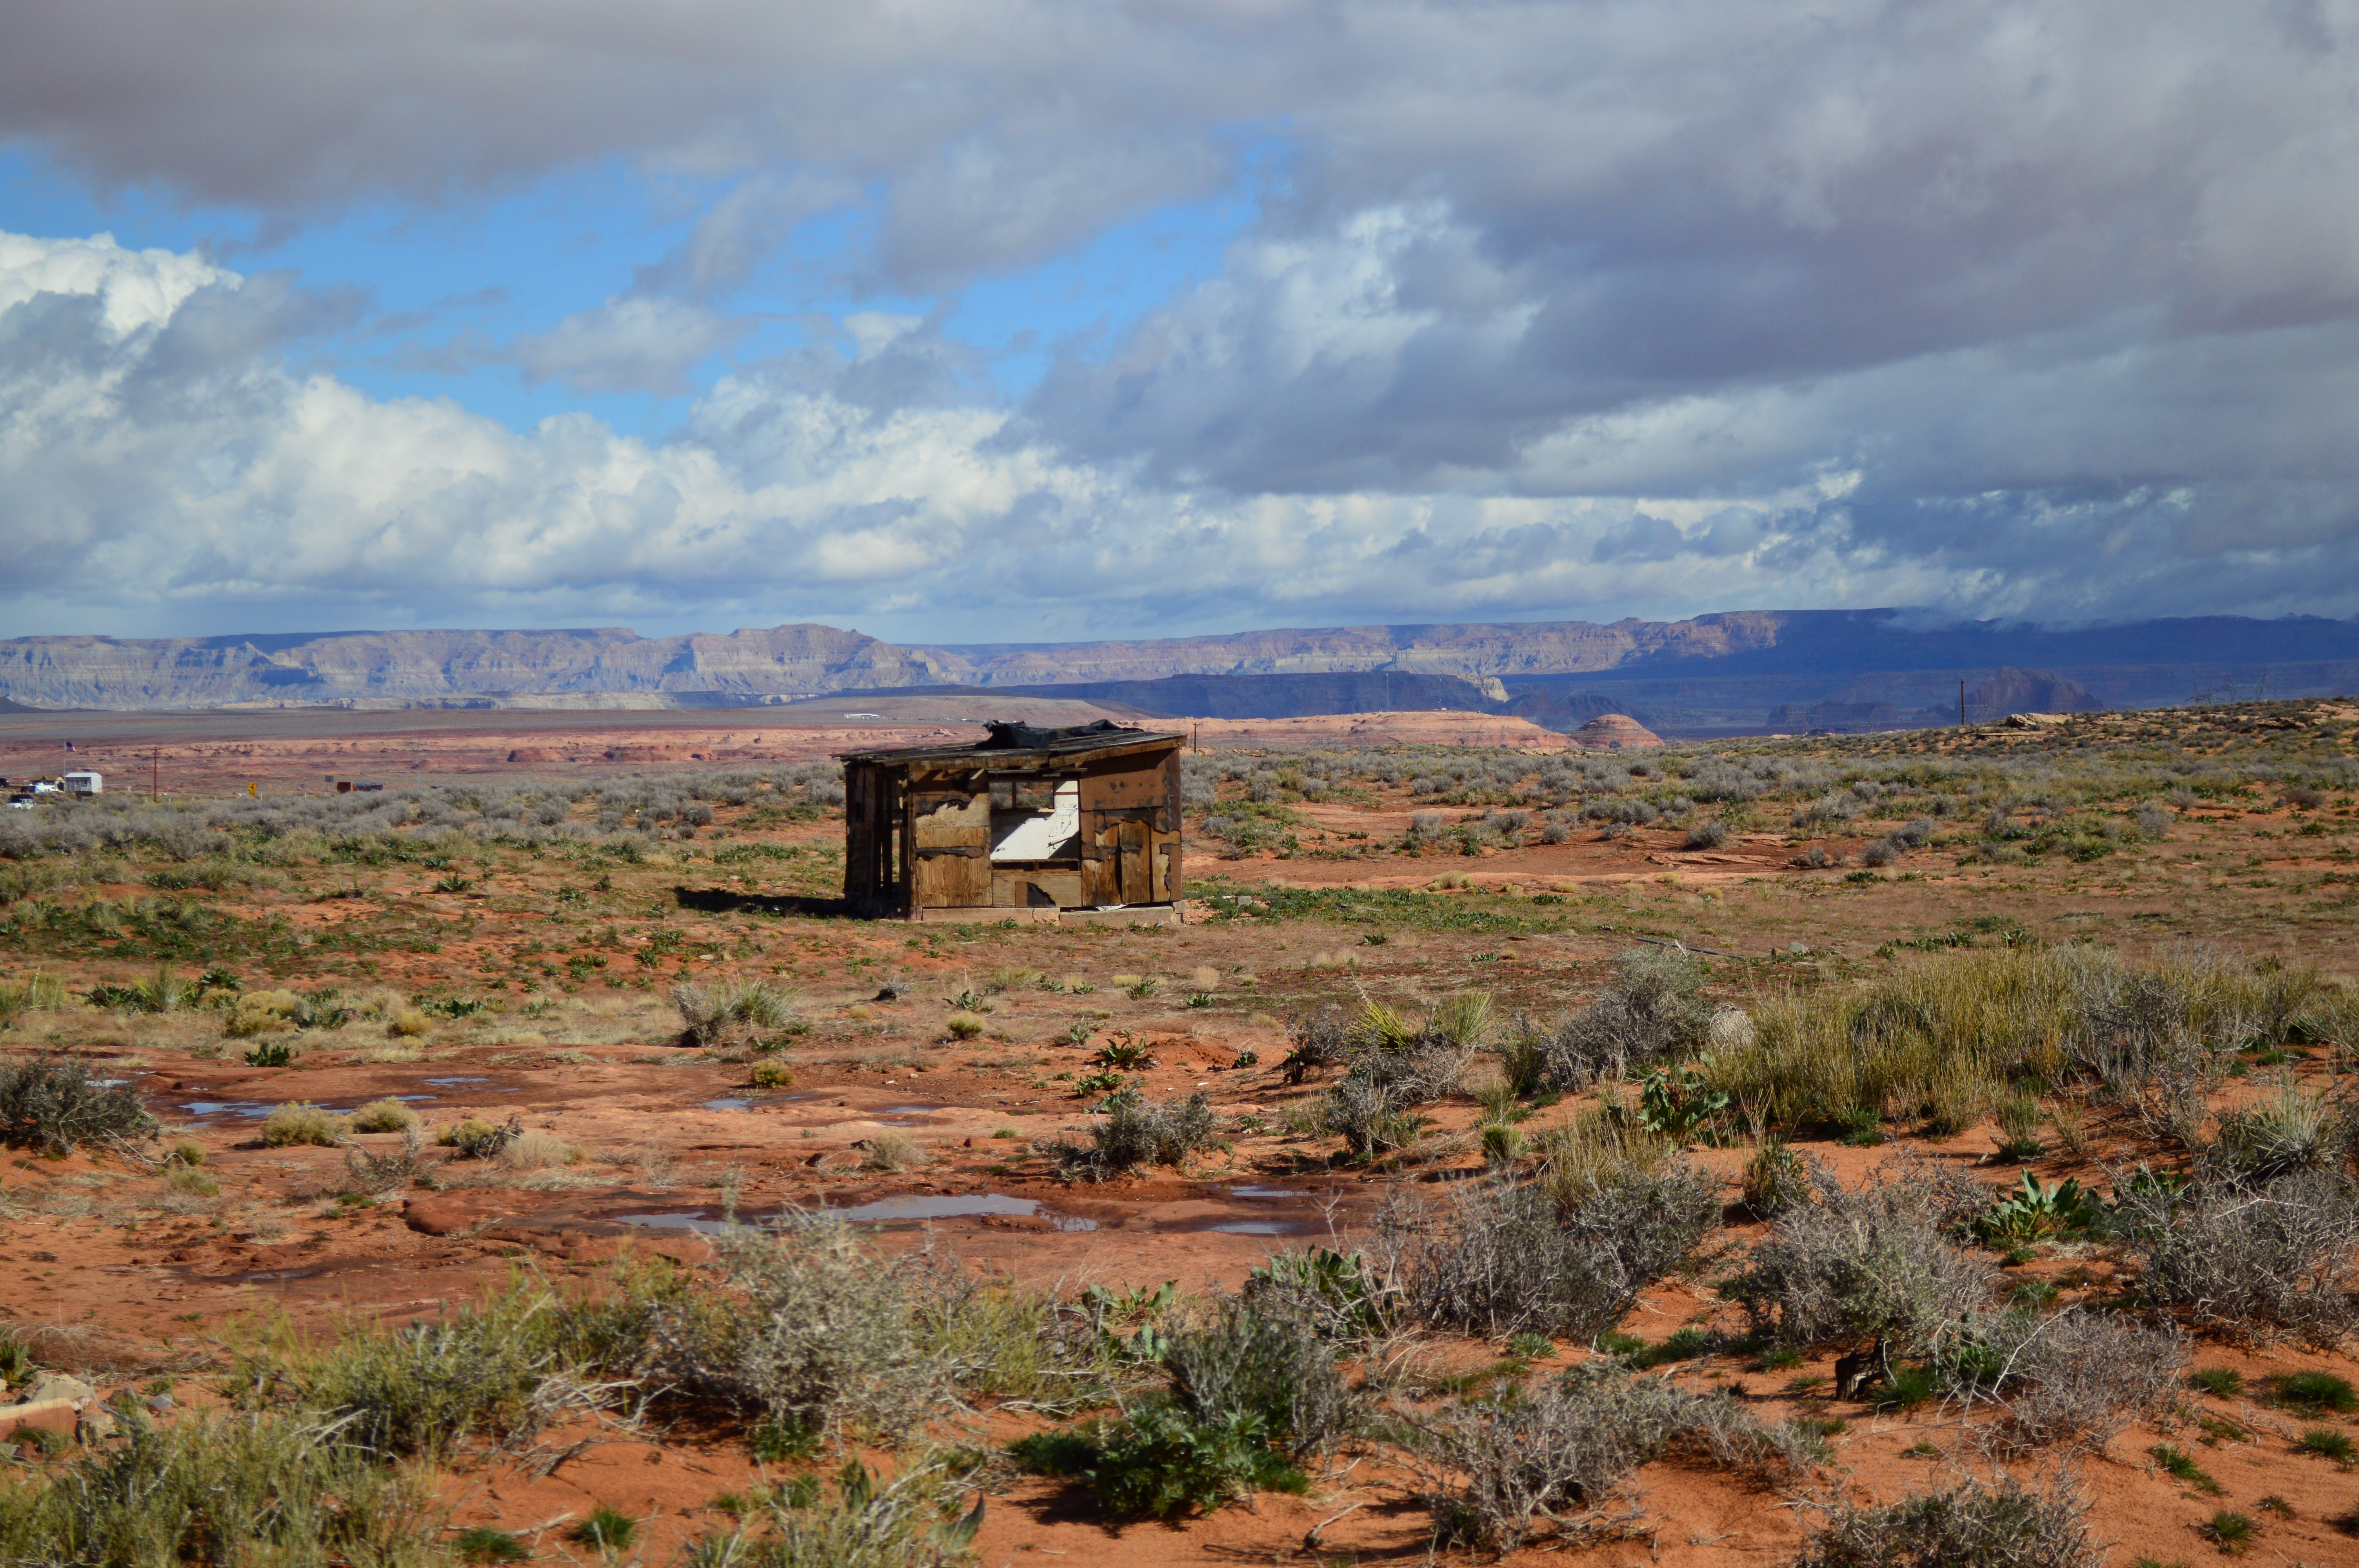 Photo by Dino Andres Alfaro  |  Abandoned shelter on Navajo Reservation heading to Secret Canyon 